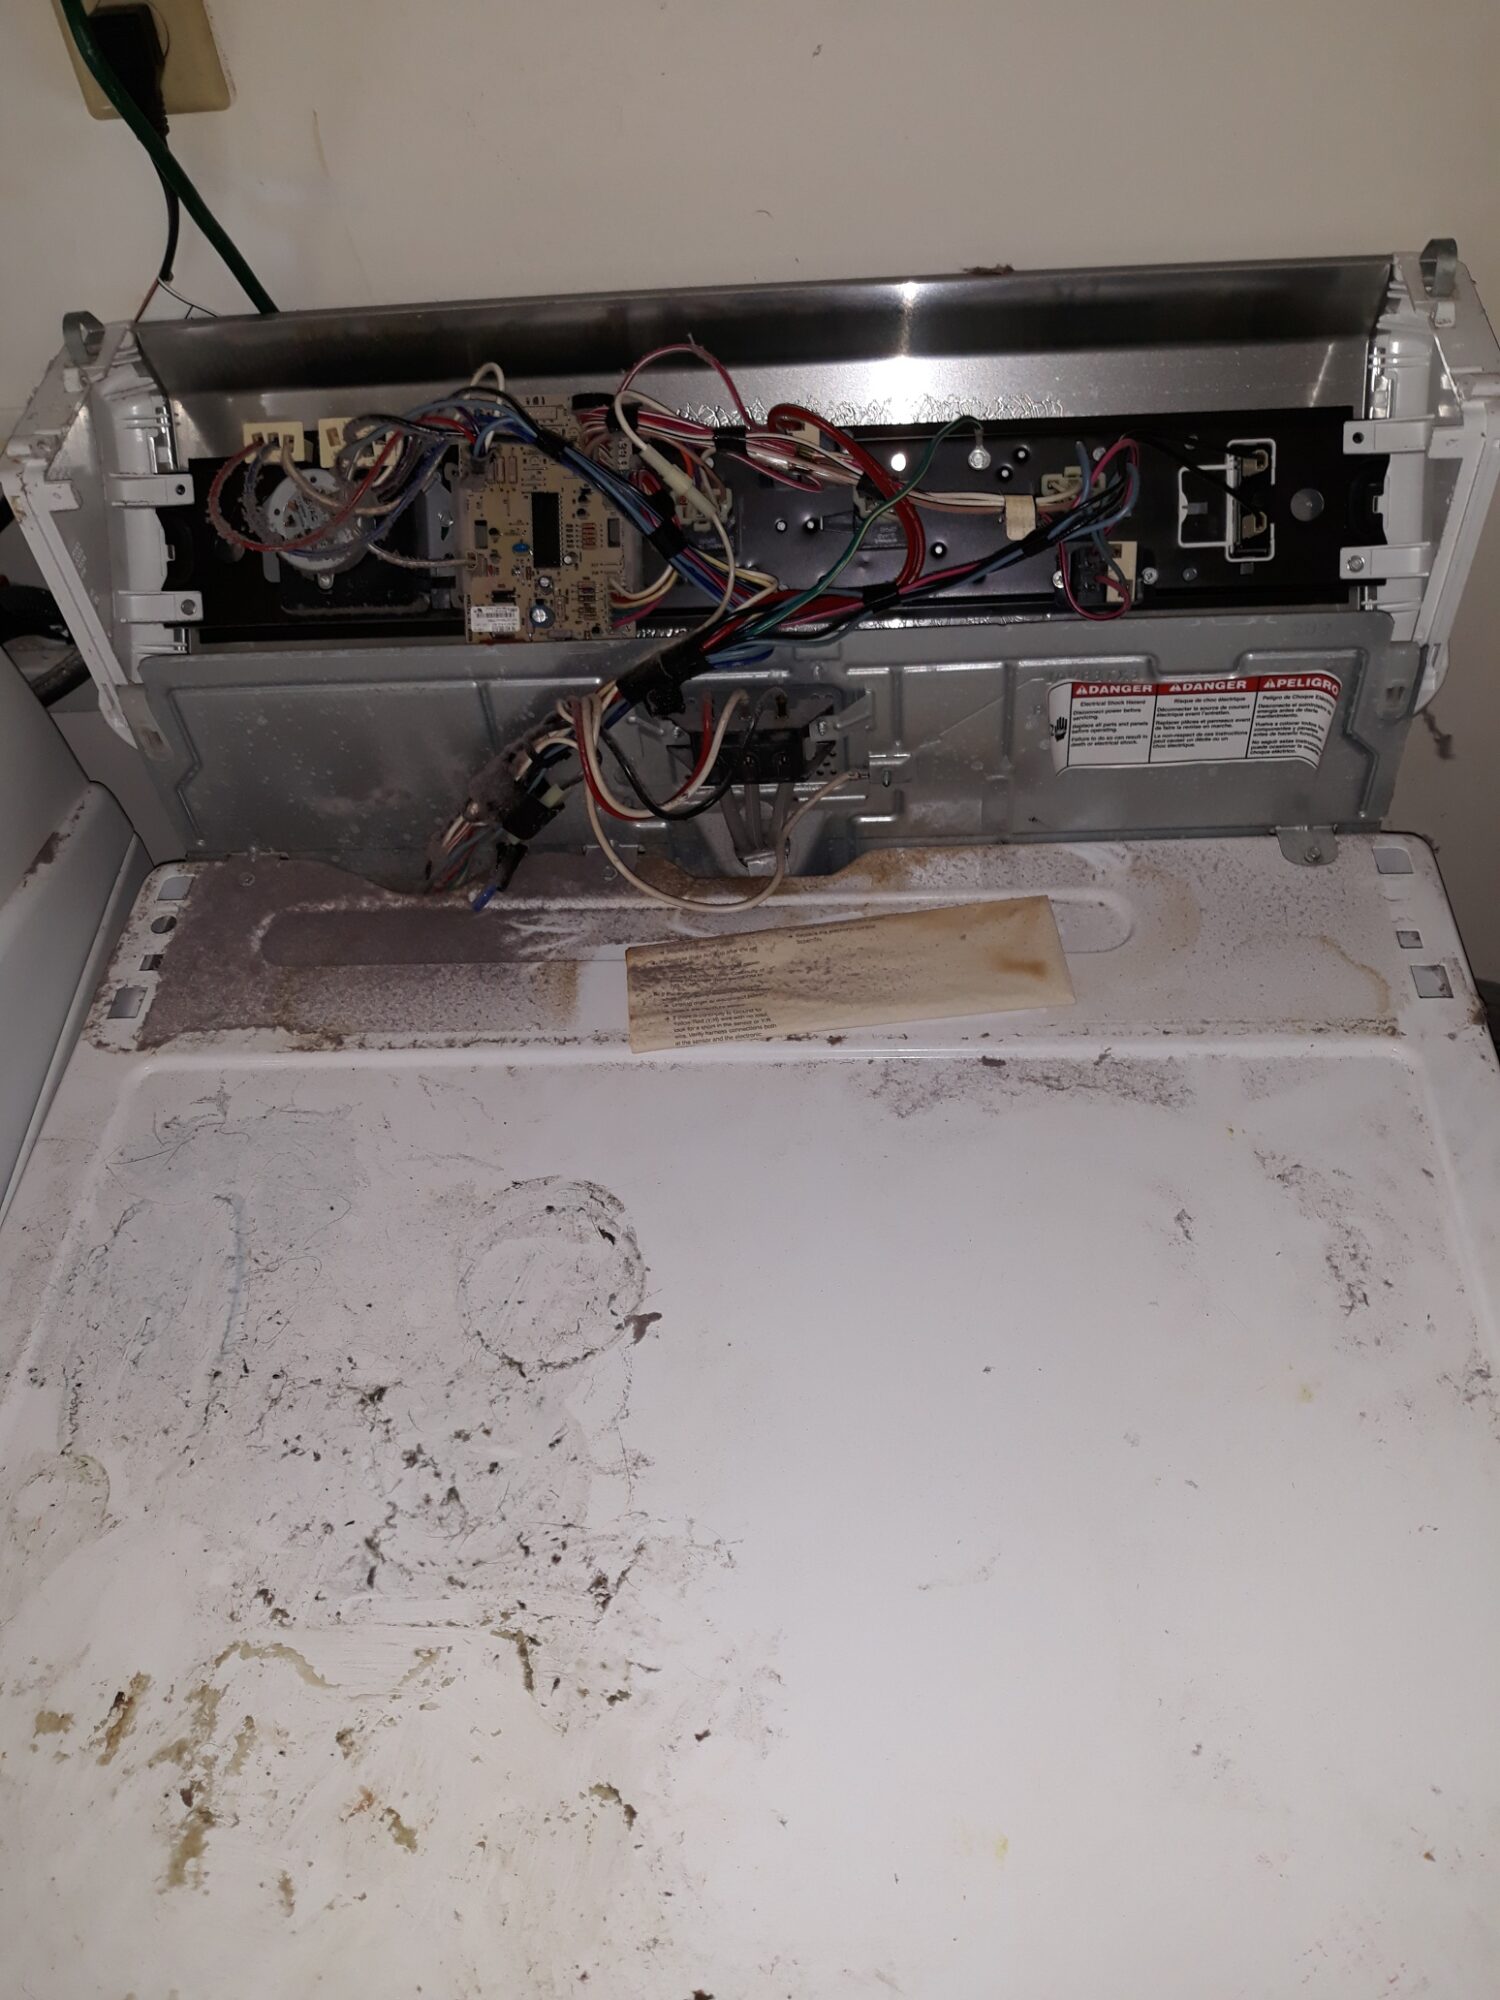 appliance repair dryer repair repair require replacement of the failed control timer that has internal contact damage pine meadows golf course rd eustis fl 32726